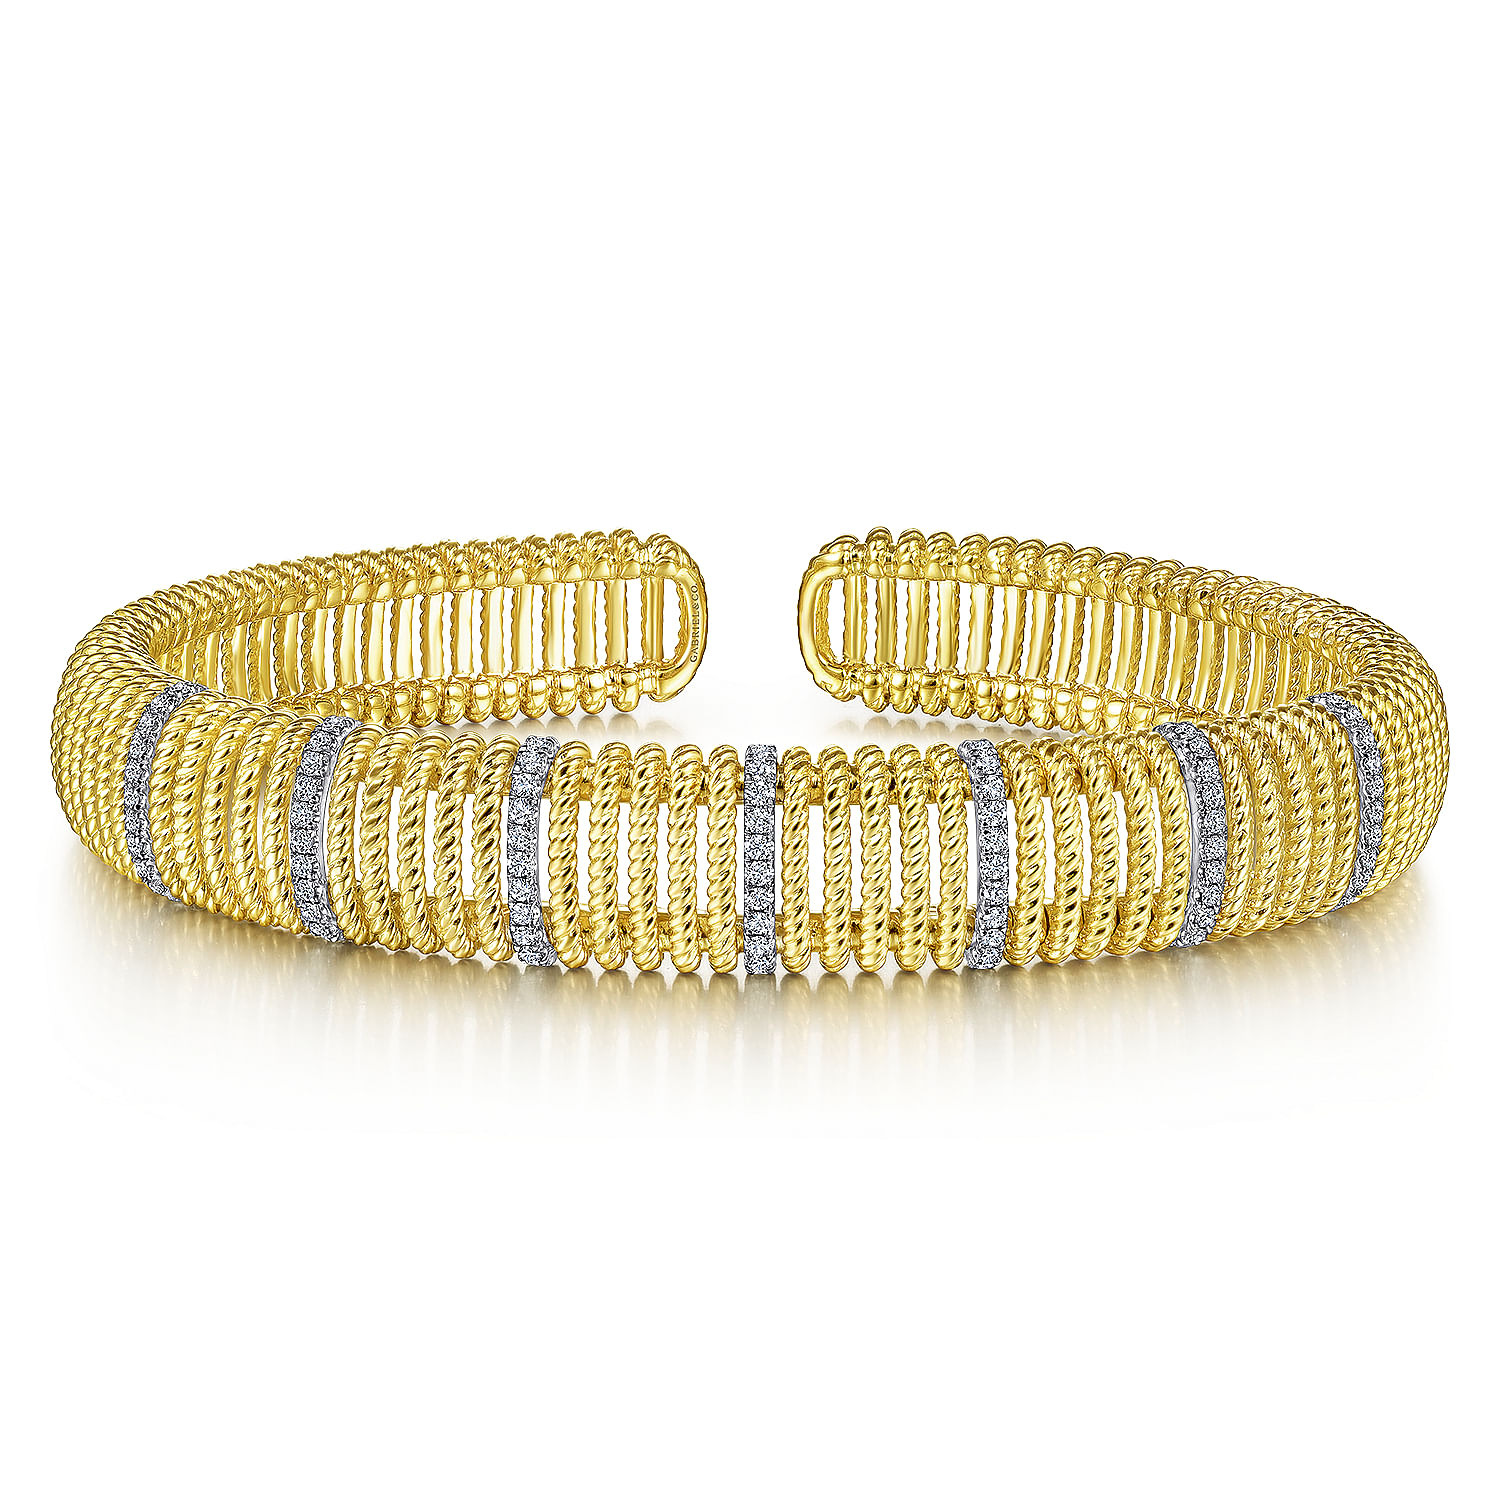 14K White-Yellow Gold Twisted Rope Cuff Bracelet with Diamond Stations